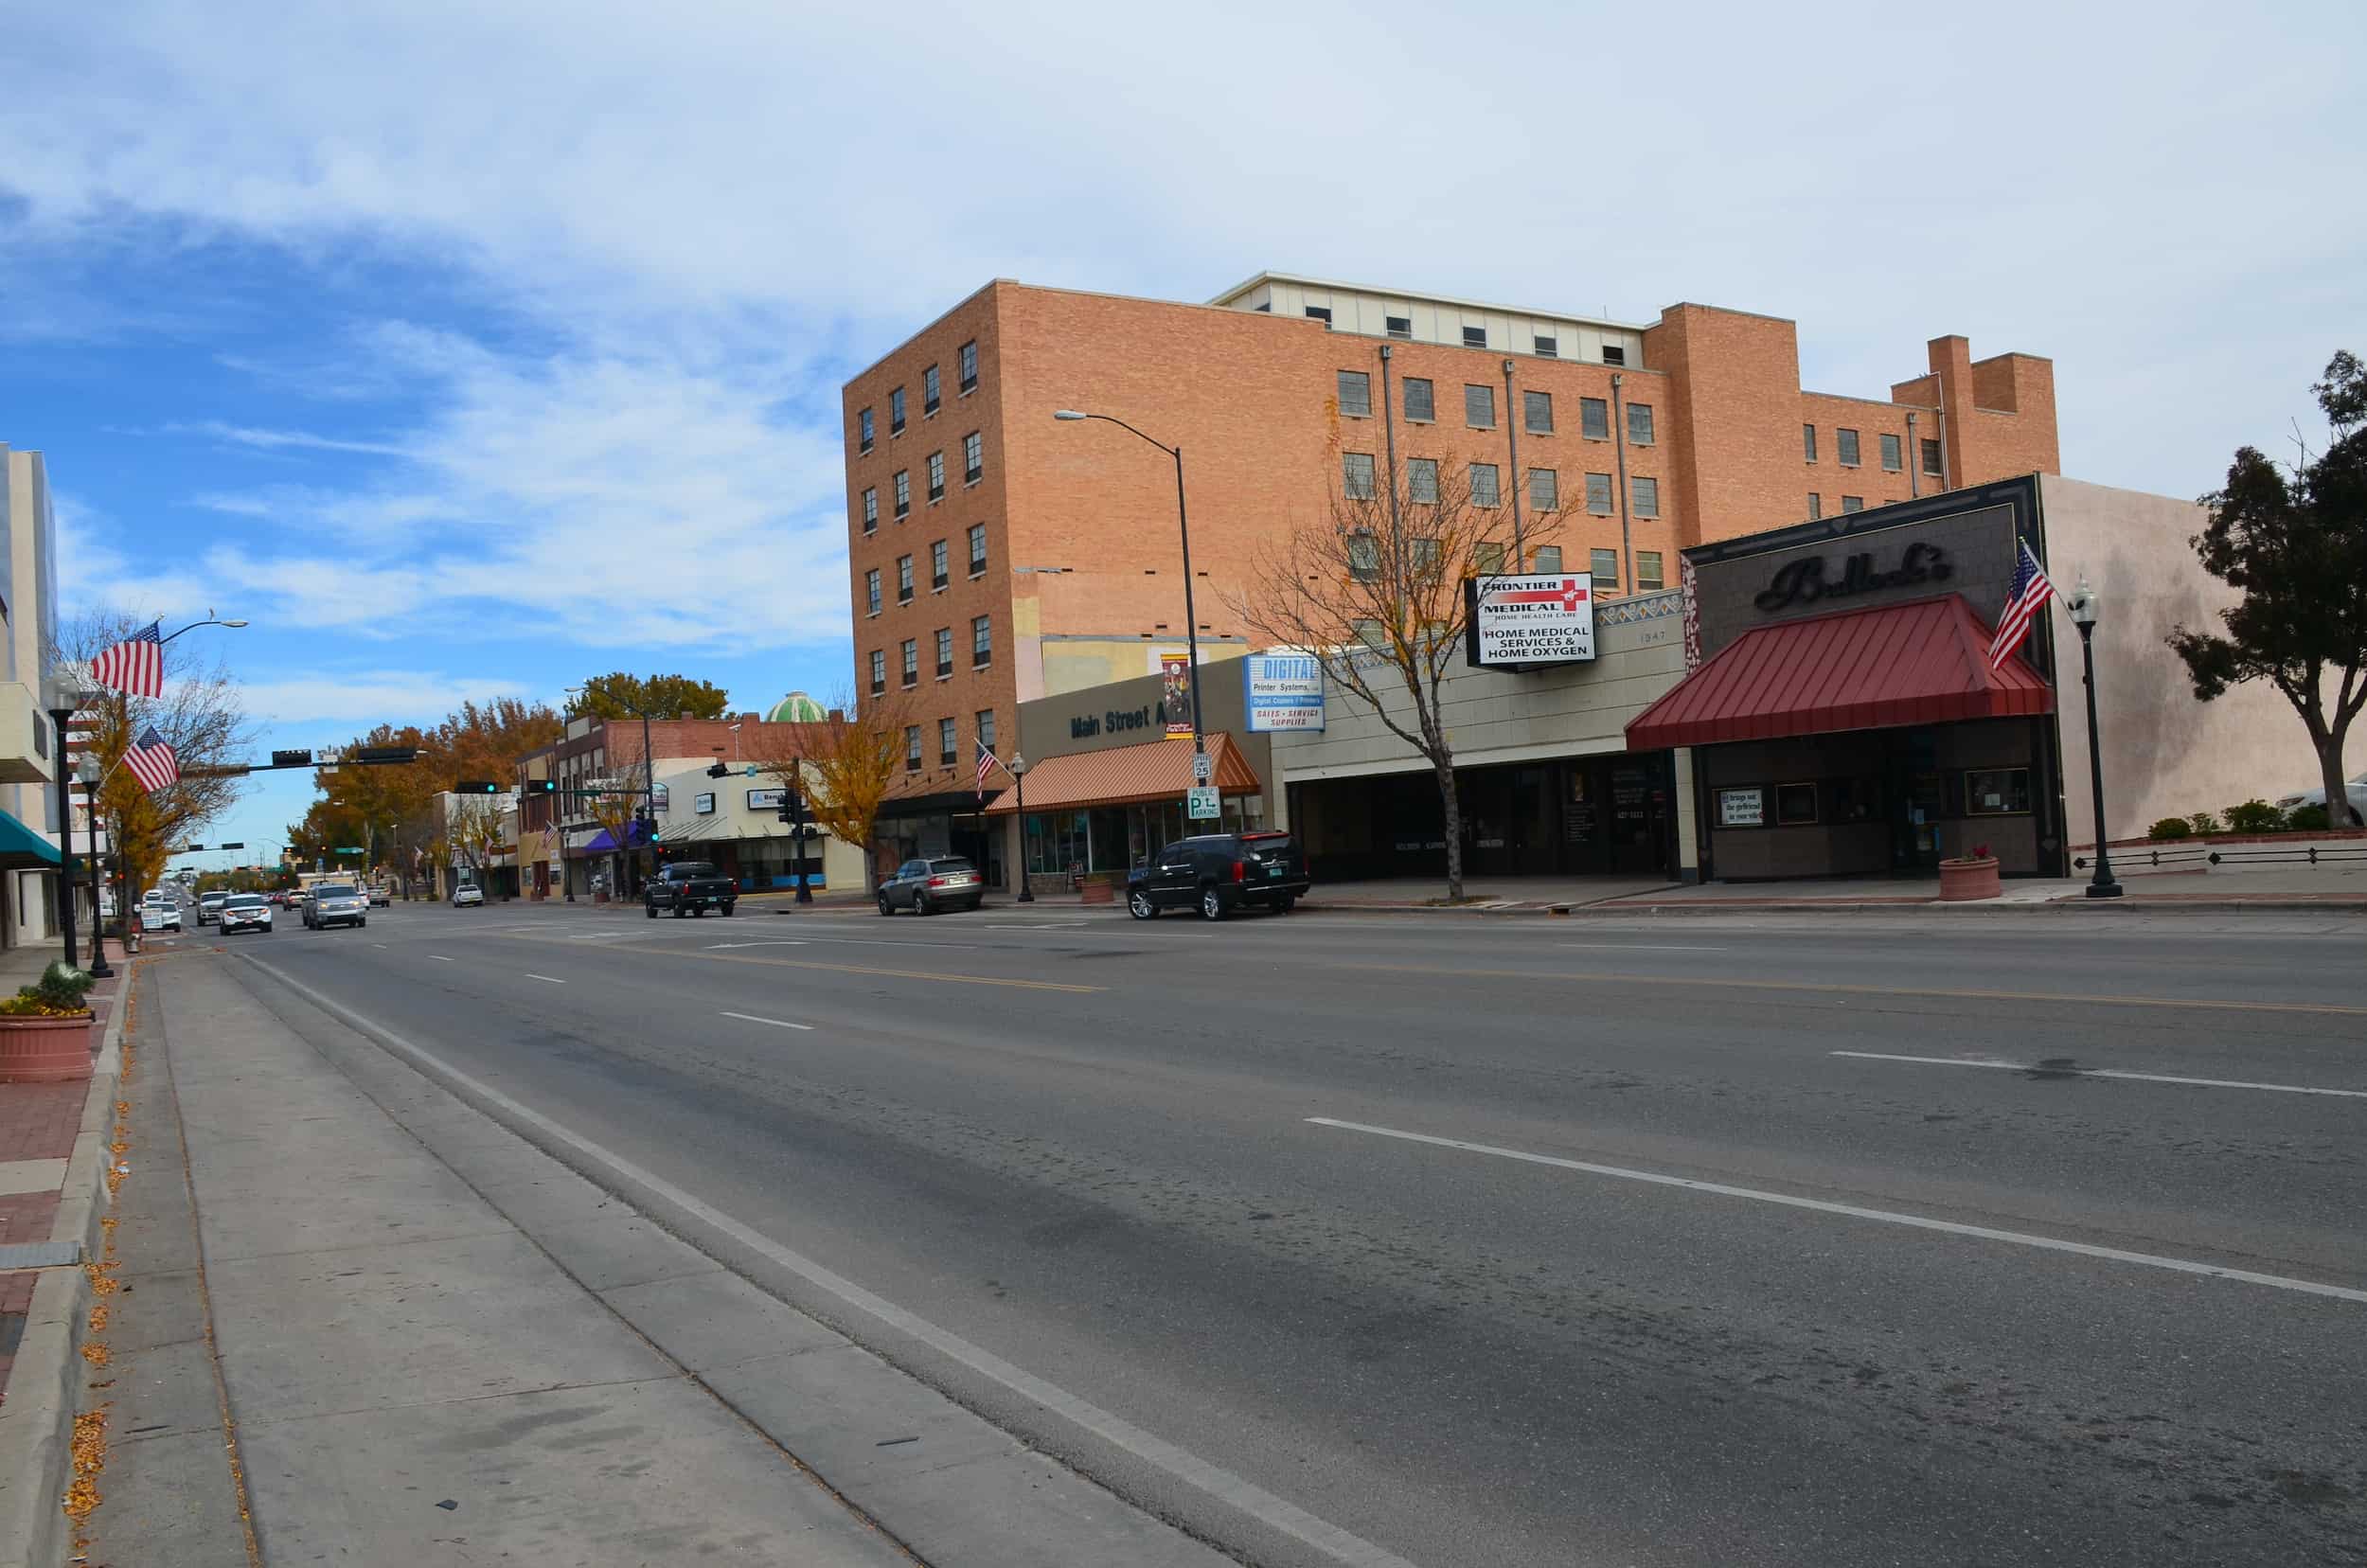 Main Street in Roswell, New Mexico